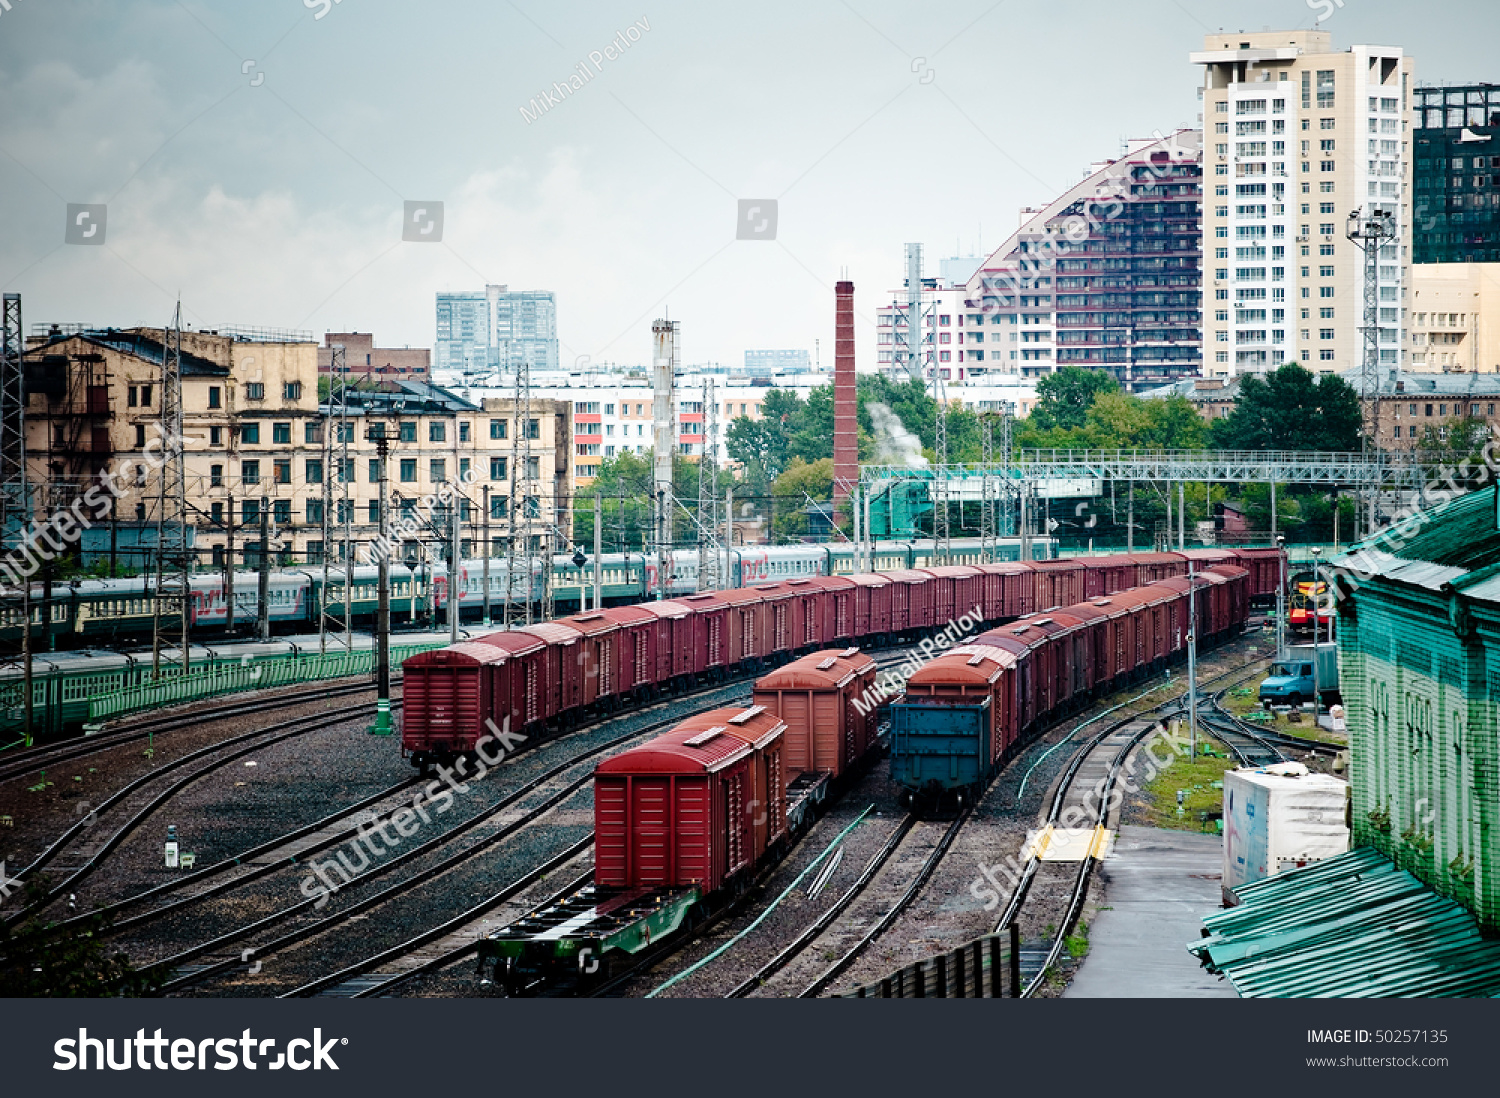 Cargo railways view in Moscow. #50257135